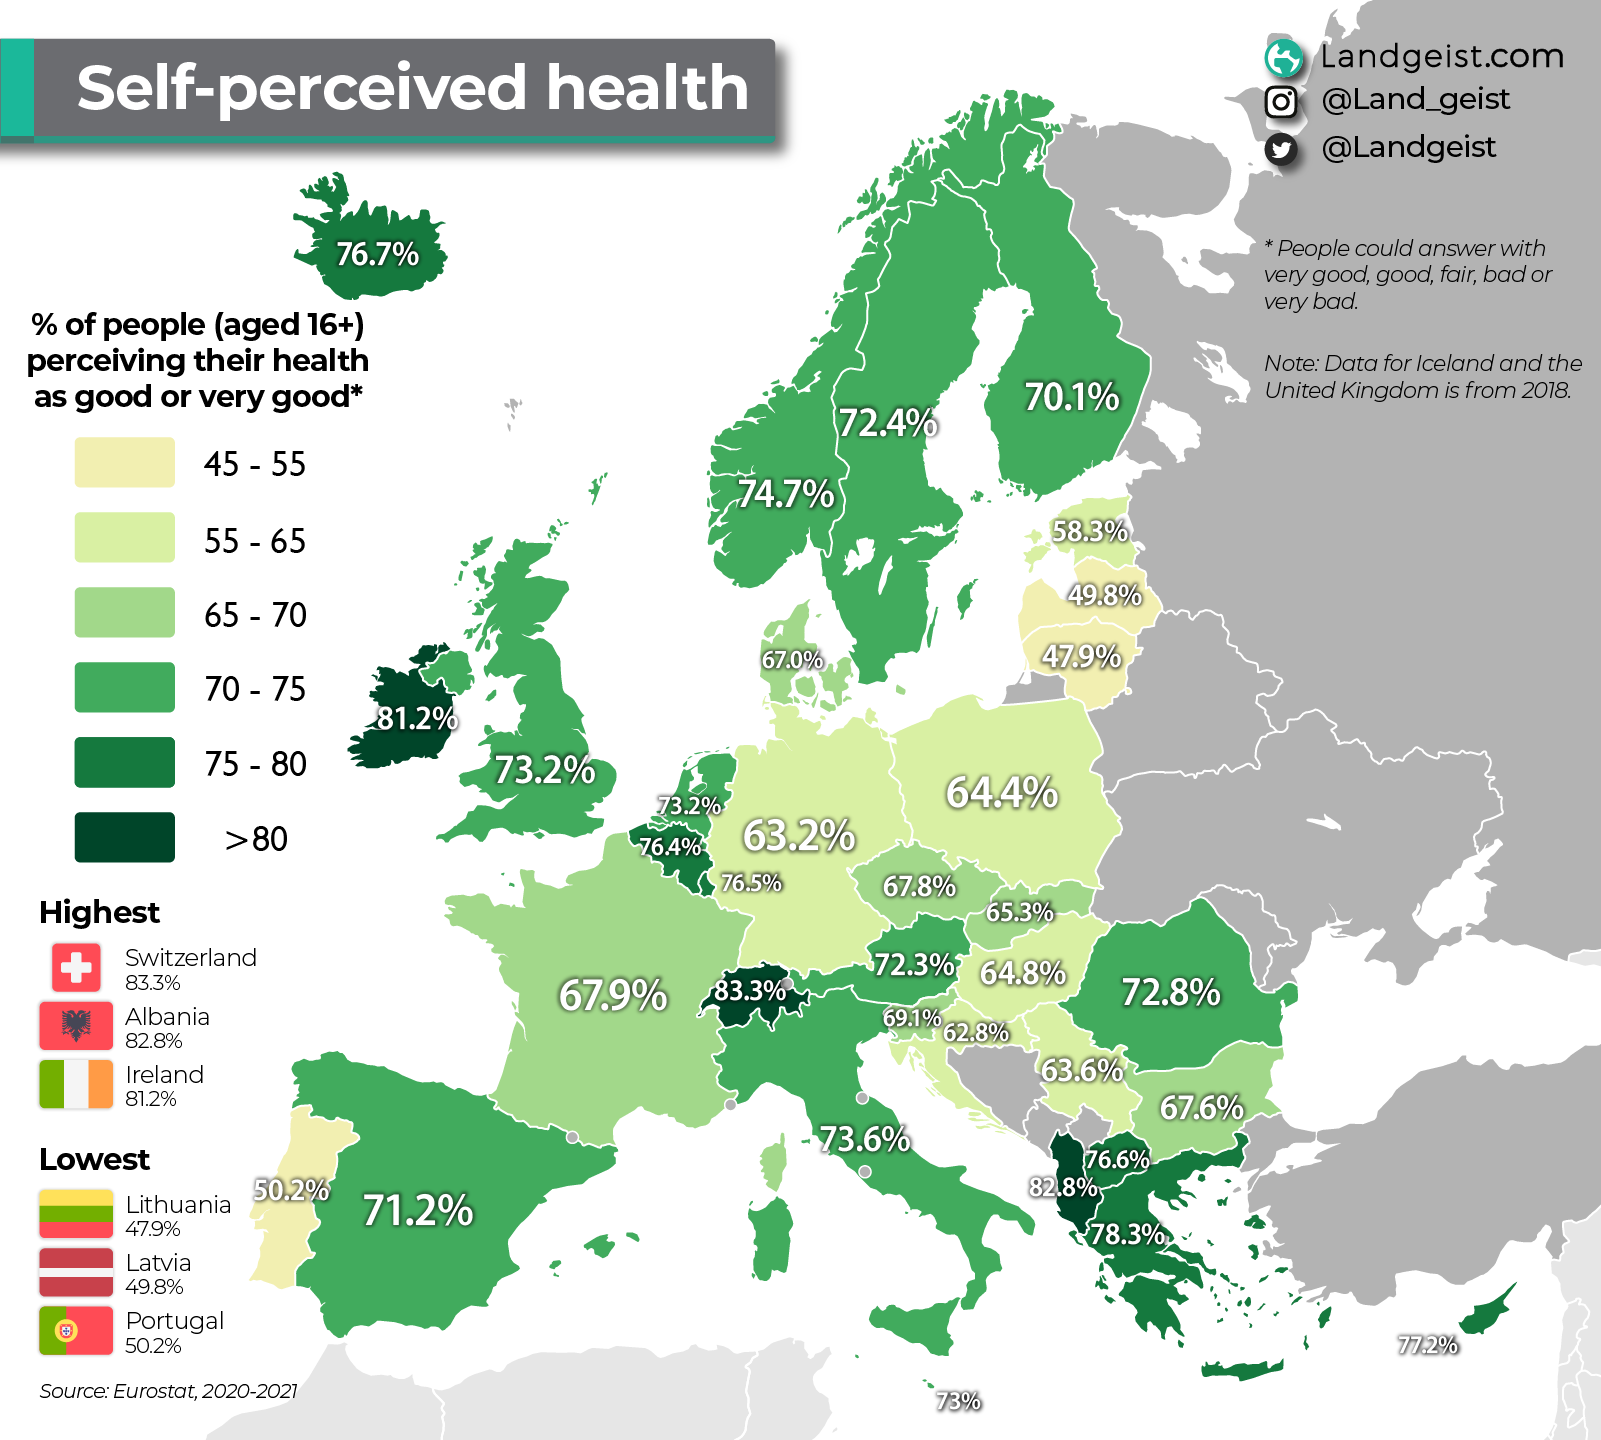 Map of the self-perceived health in Europe.